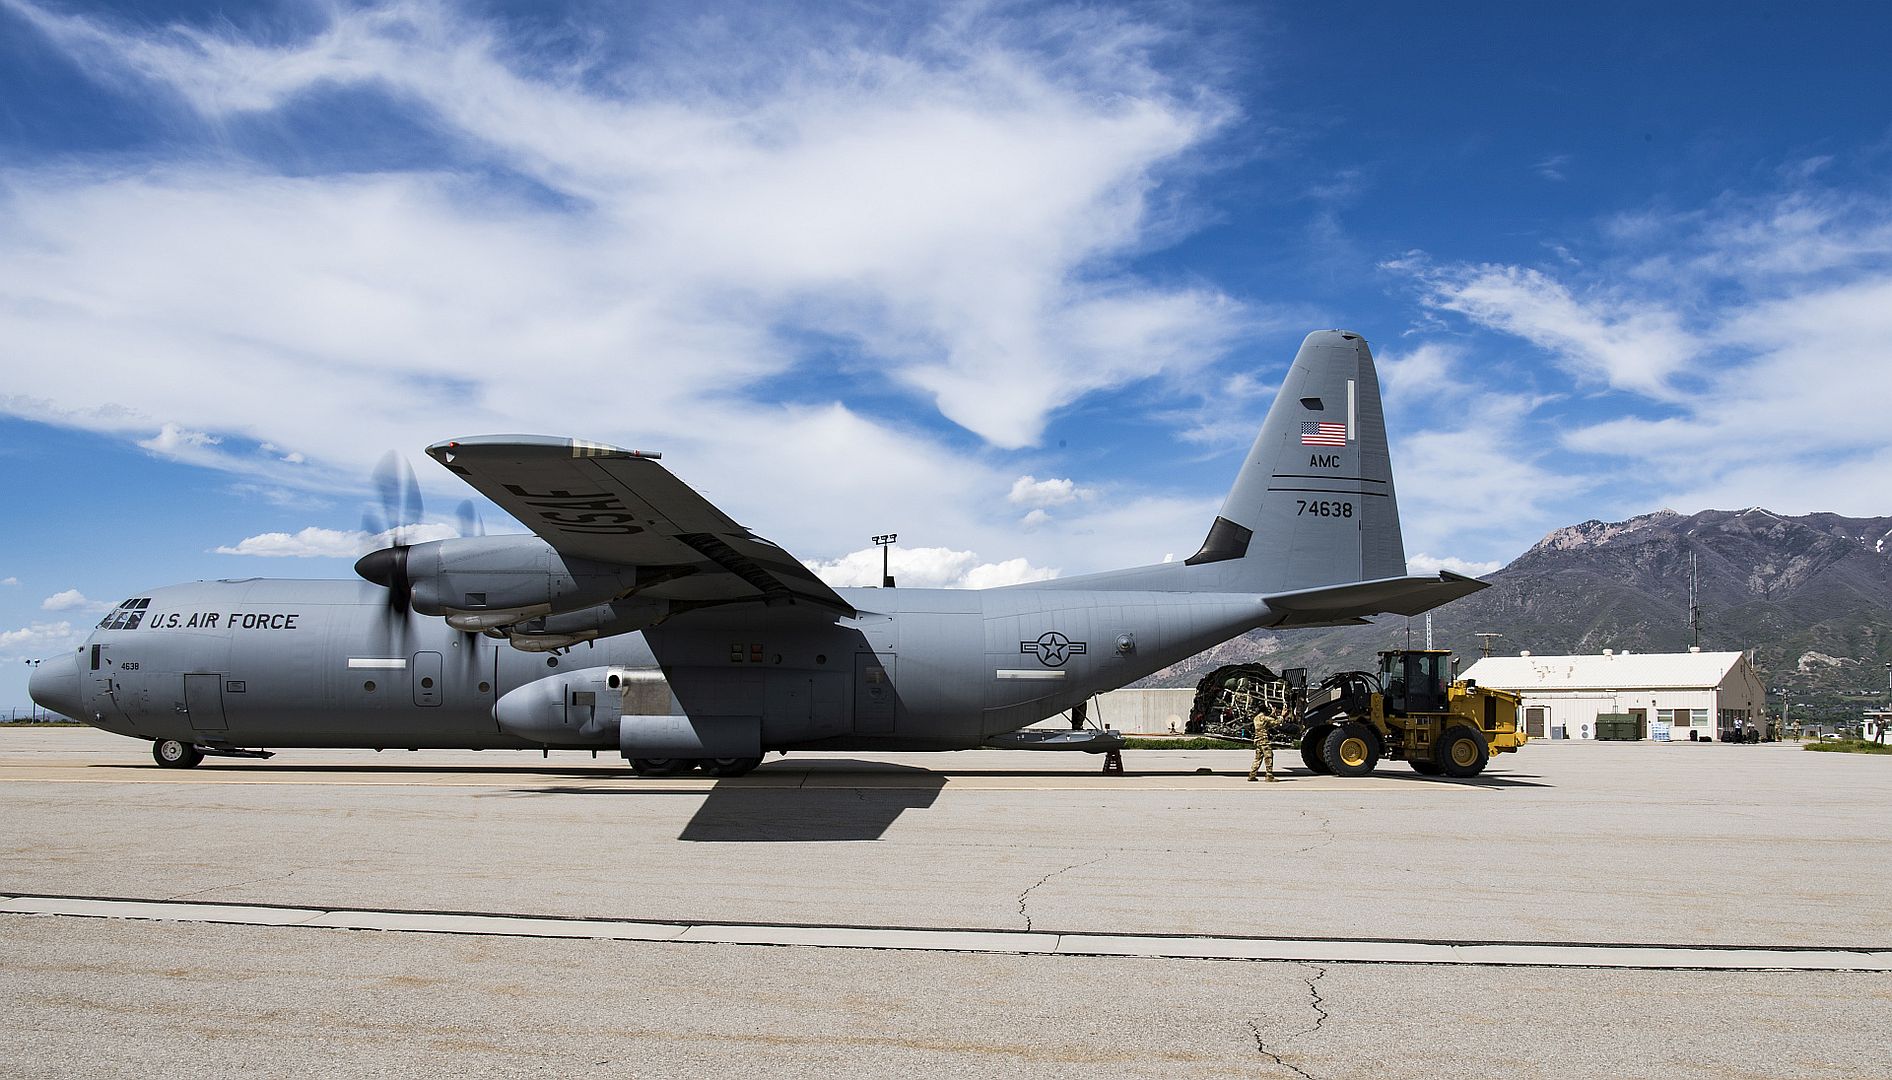 130 J S From The 317th Airlift Wing Dyess Air Force Base Texas Transport Airmen And Cargo From The 366th Fighter Wing